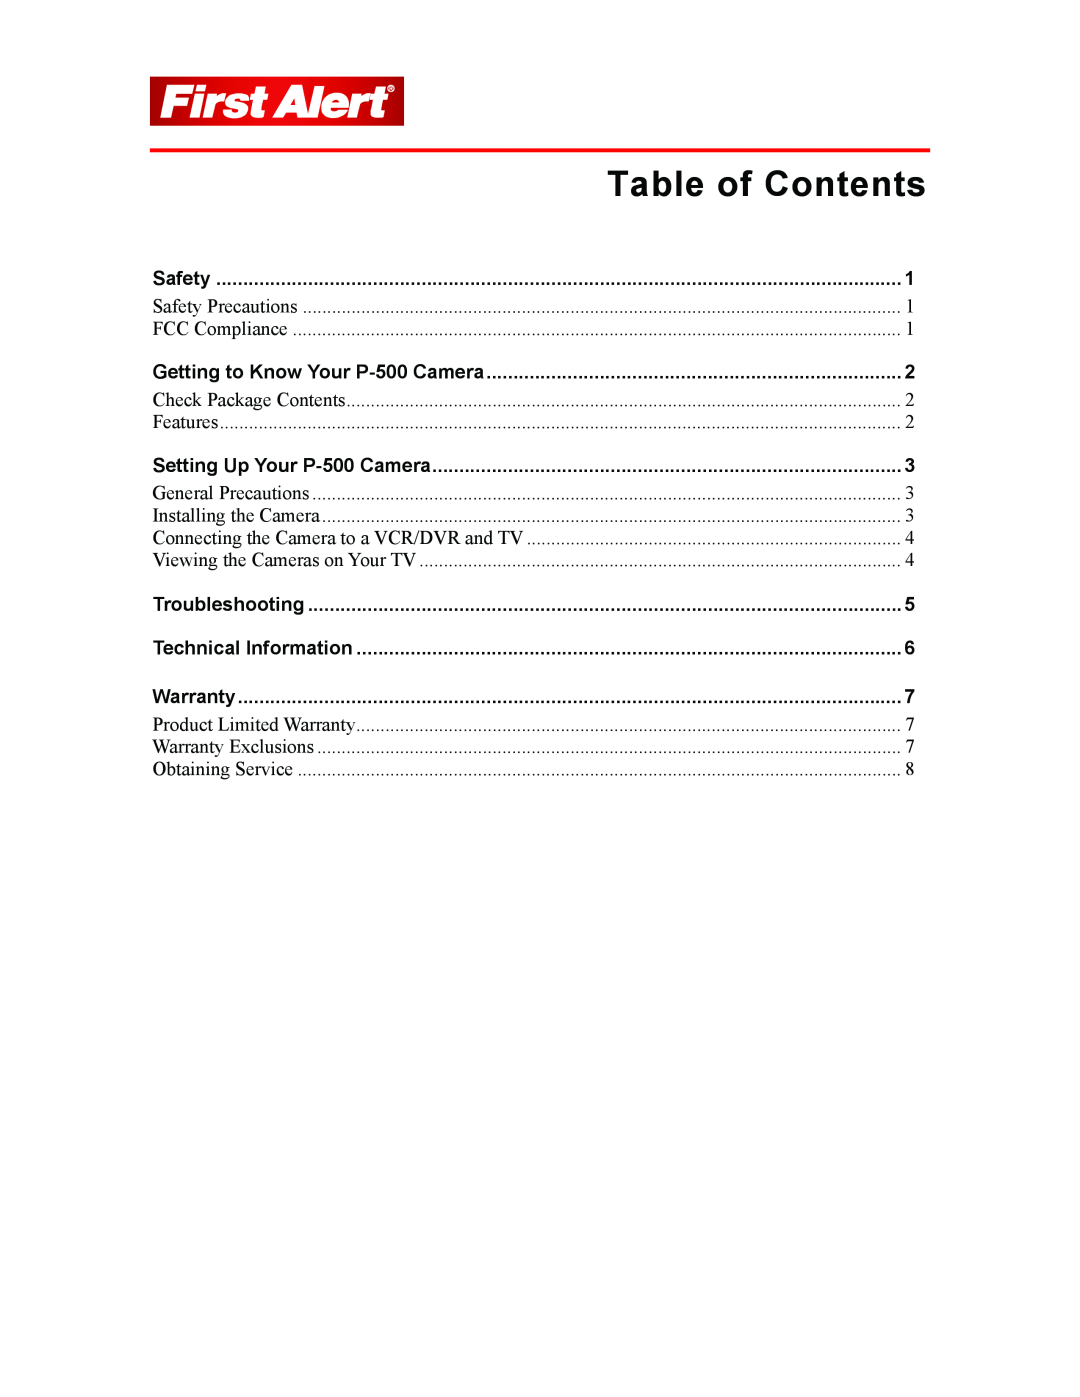 First Alert P-500 user manual Table of Contents 